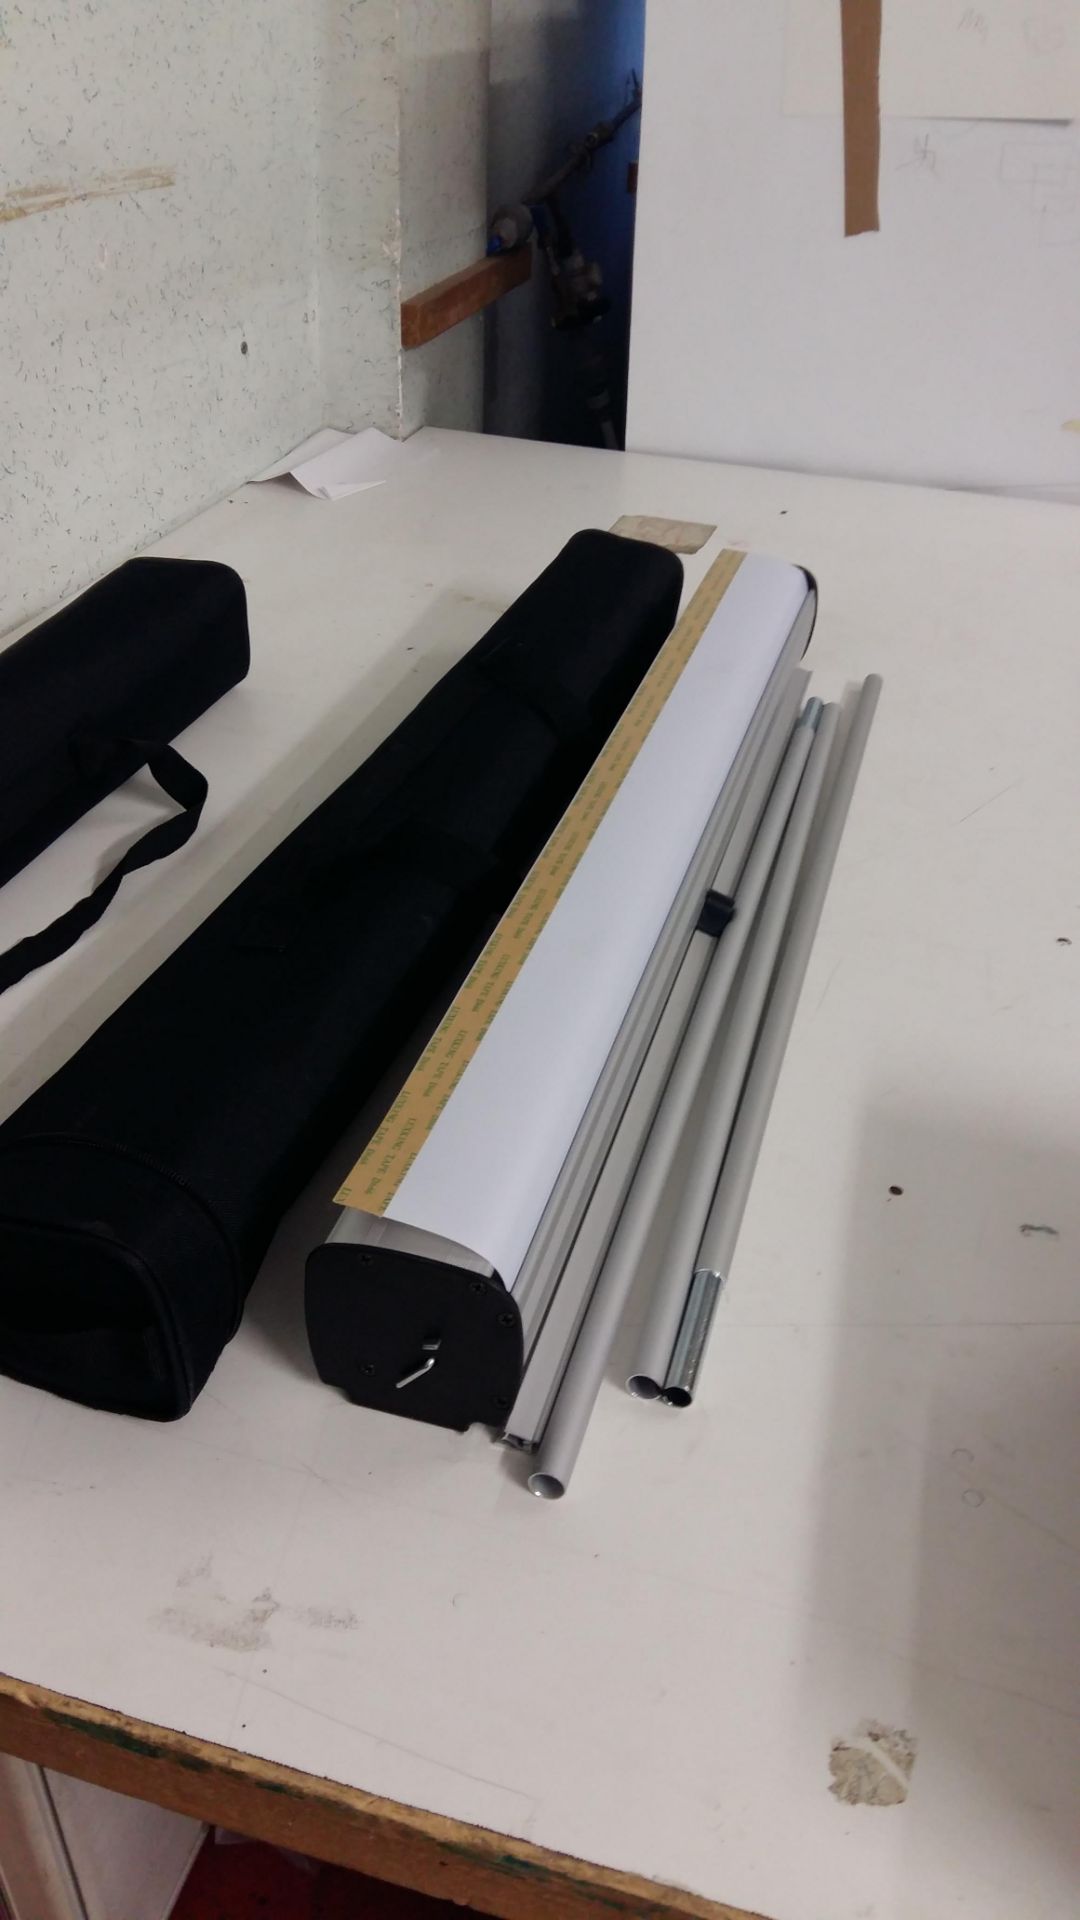 (6) 800mm Expand Media Roll Up Banners - Brand New in Box - Image 2 of 6